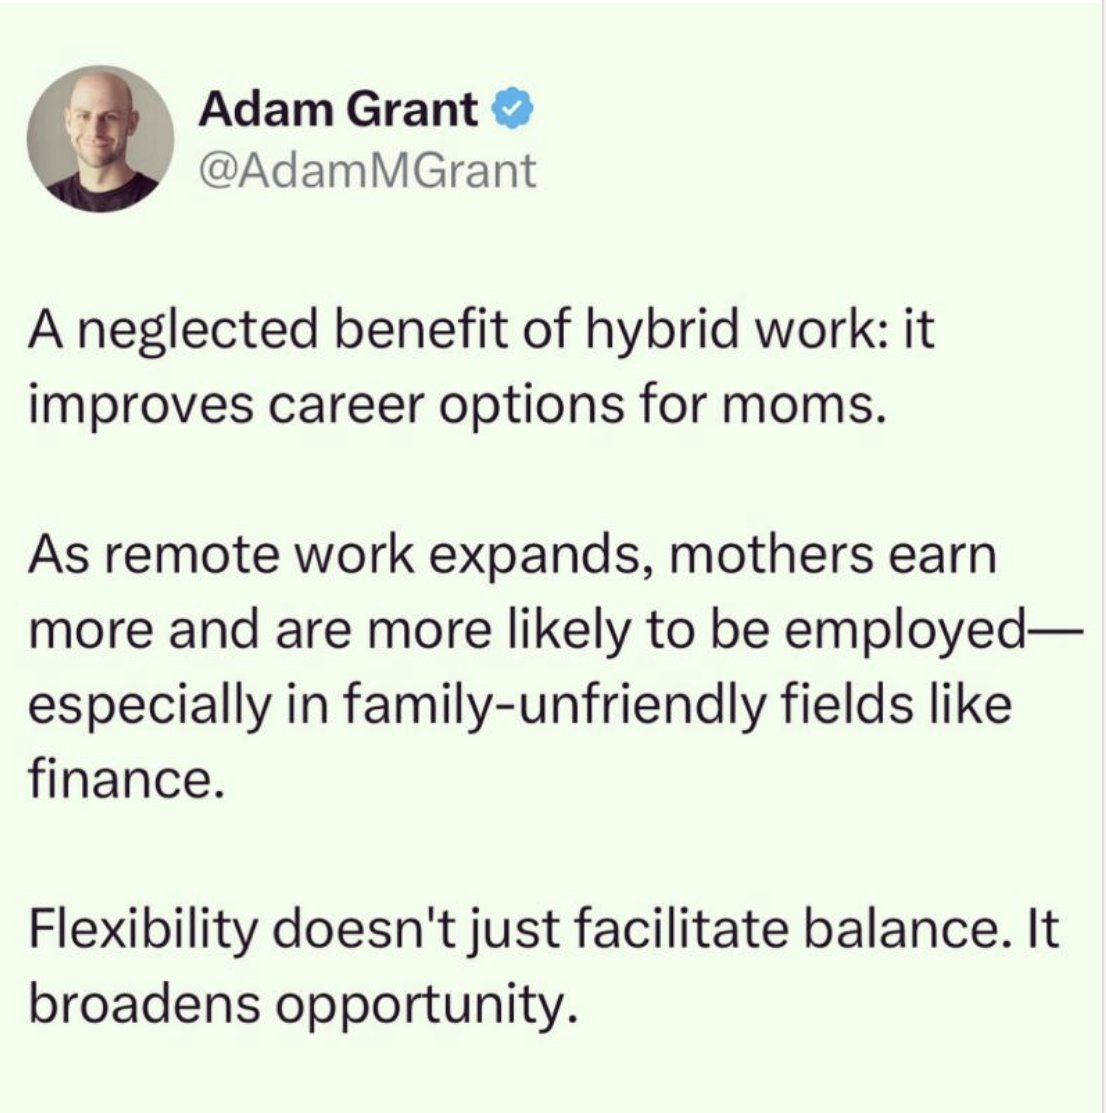 🌐ImageSim.com

Adam Grant's words remind us to appreciate our own professional fulfillment and to extend understanding to those who seek theirs. 

#ImageSim #workjoy #careerfit #passionpurpose #mindfulworking #gratitude #adamgrant